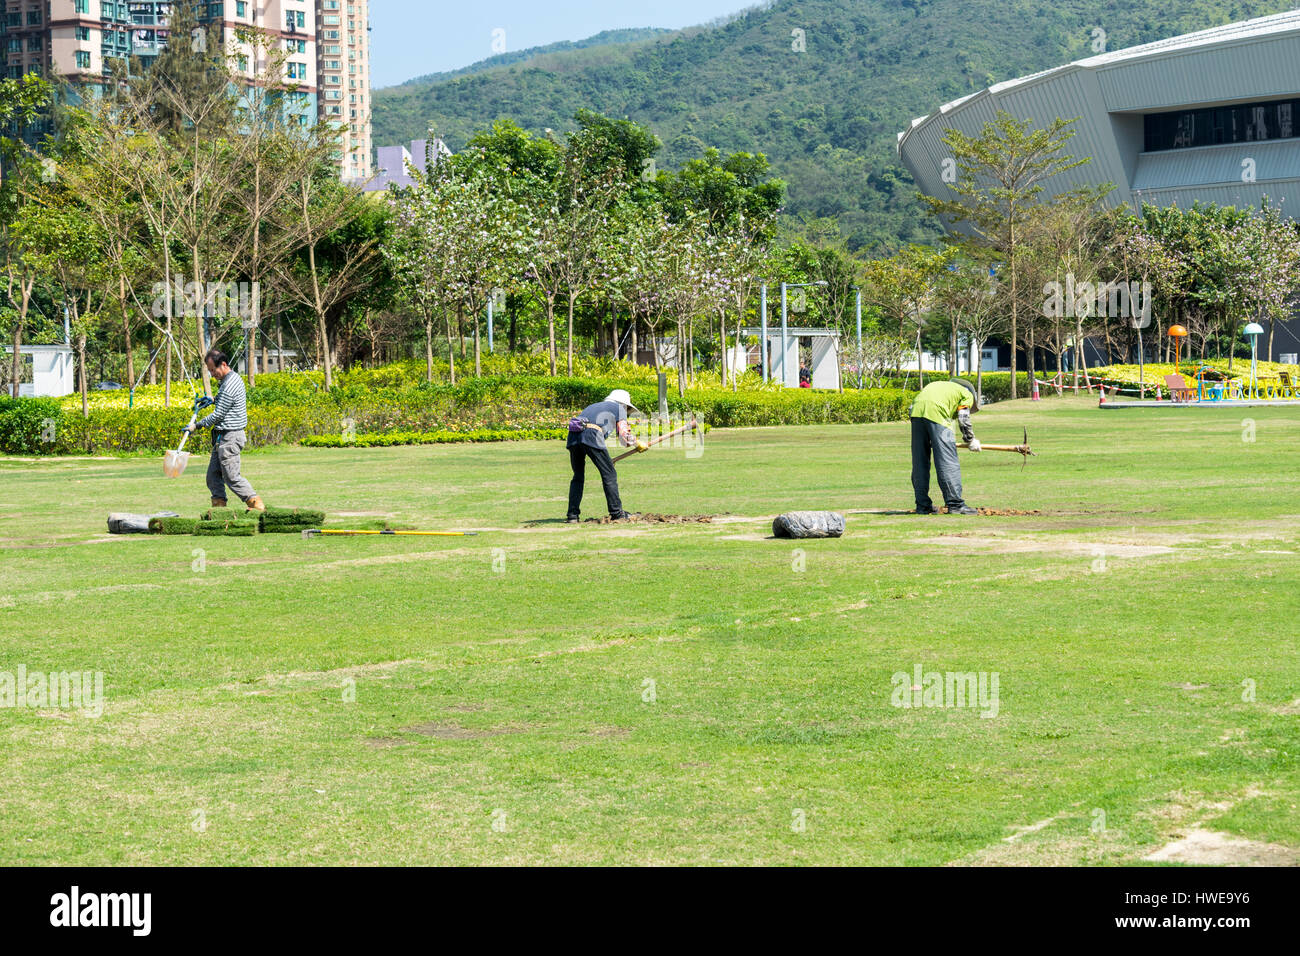 Workers with shovels and picks repairing digging the grass lawn at a park Stock Photo